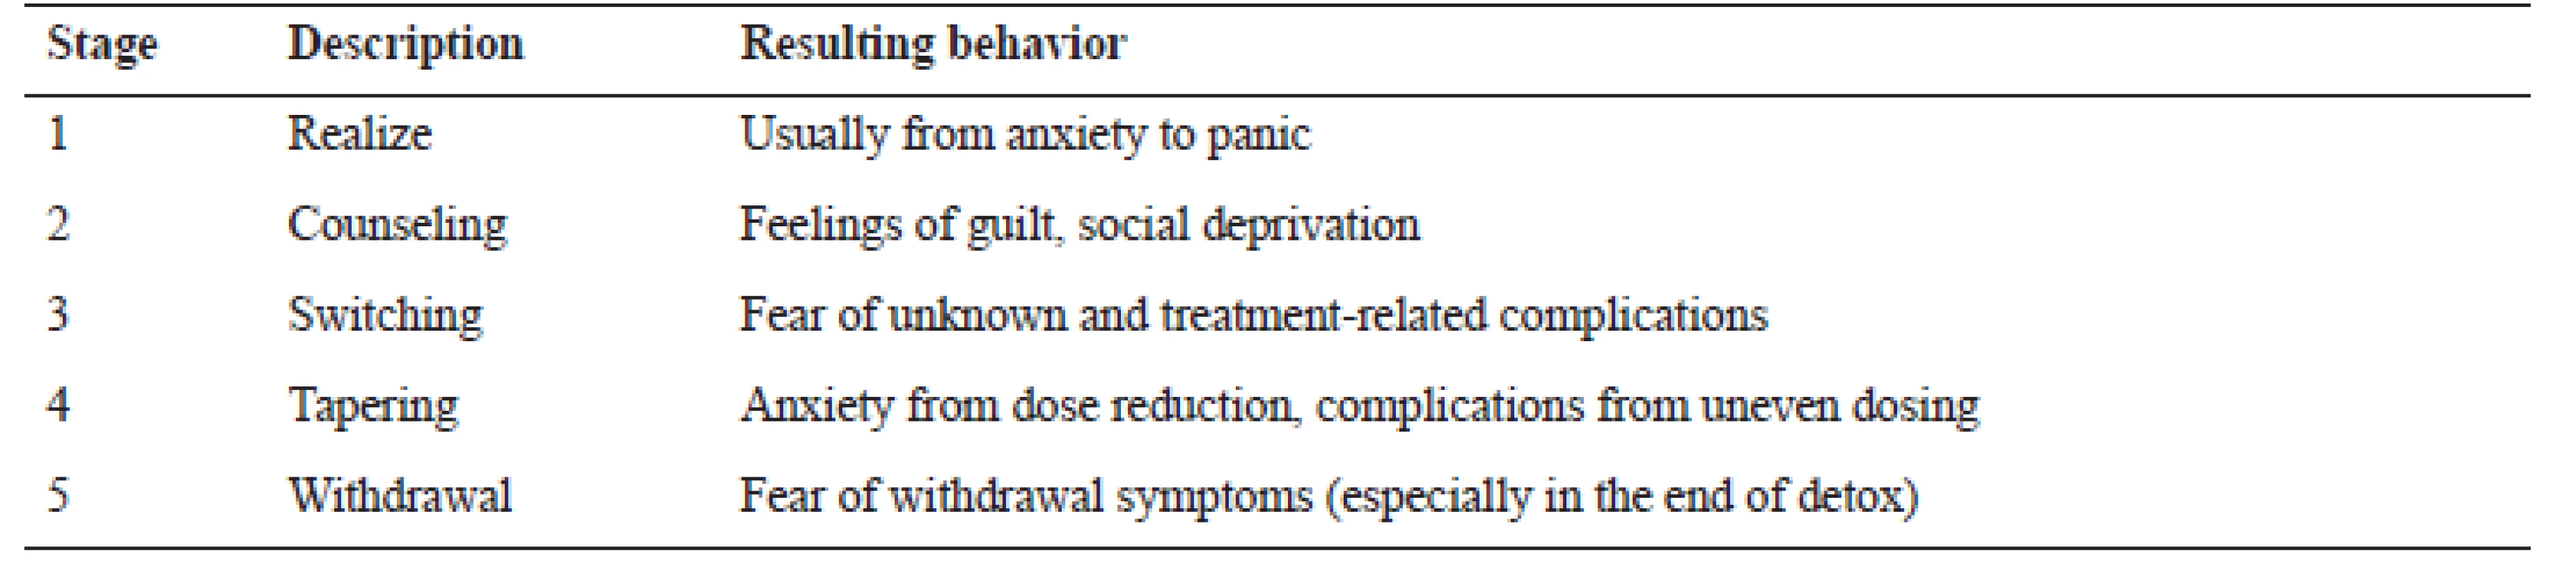 Stages and detoxification complication(s)<sup>70)</sup>